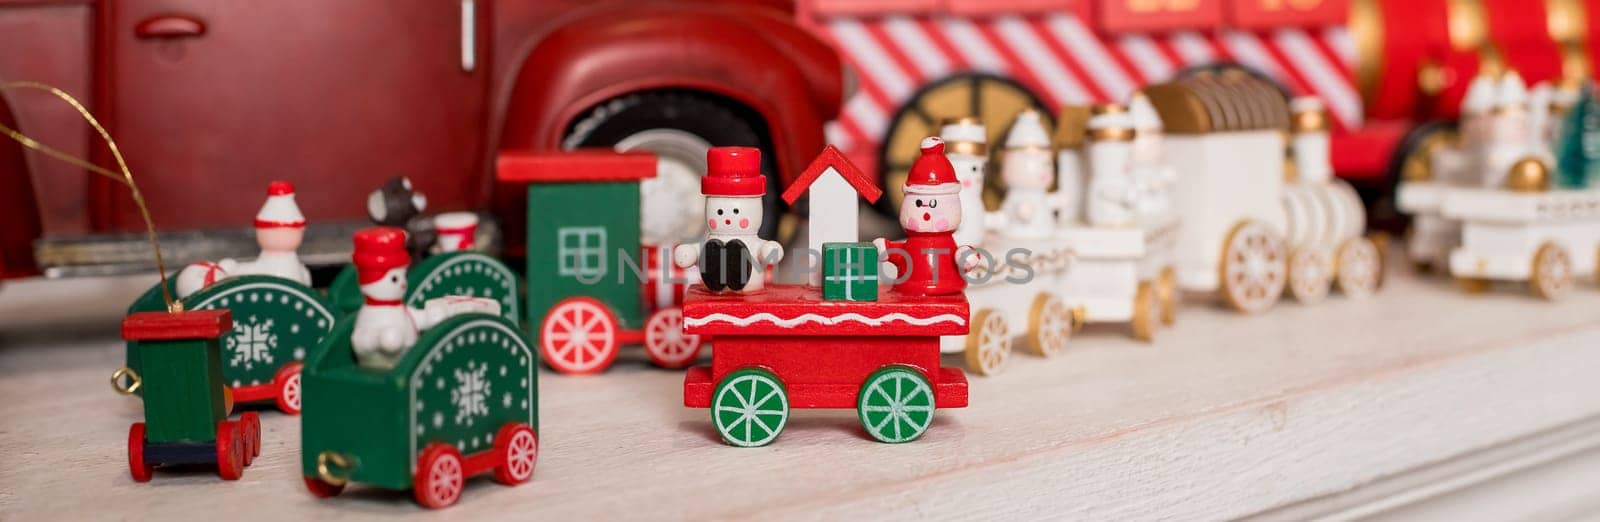 Wooden toy train. Christmas trip. Christmas card. toy vintage steam locomotive.New year celebration concept.toy store. web banner by YuliaYaspe1979